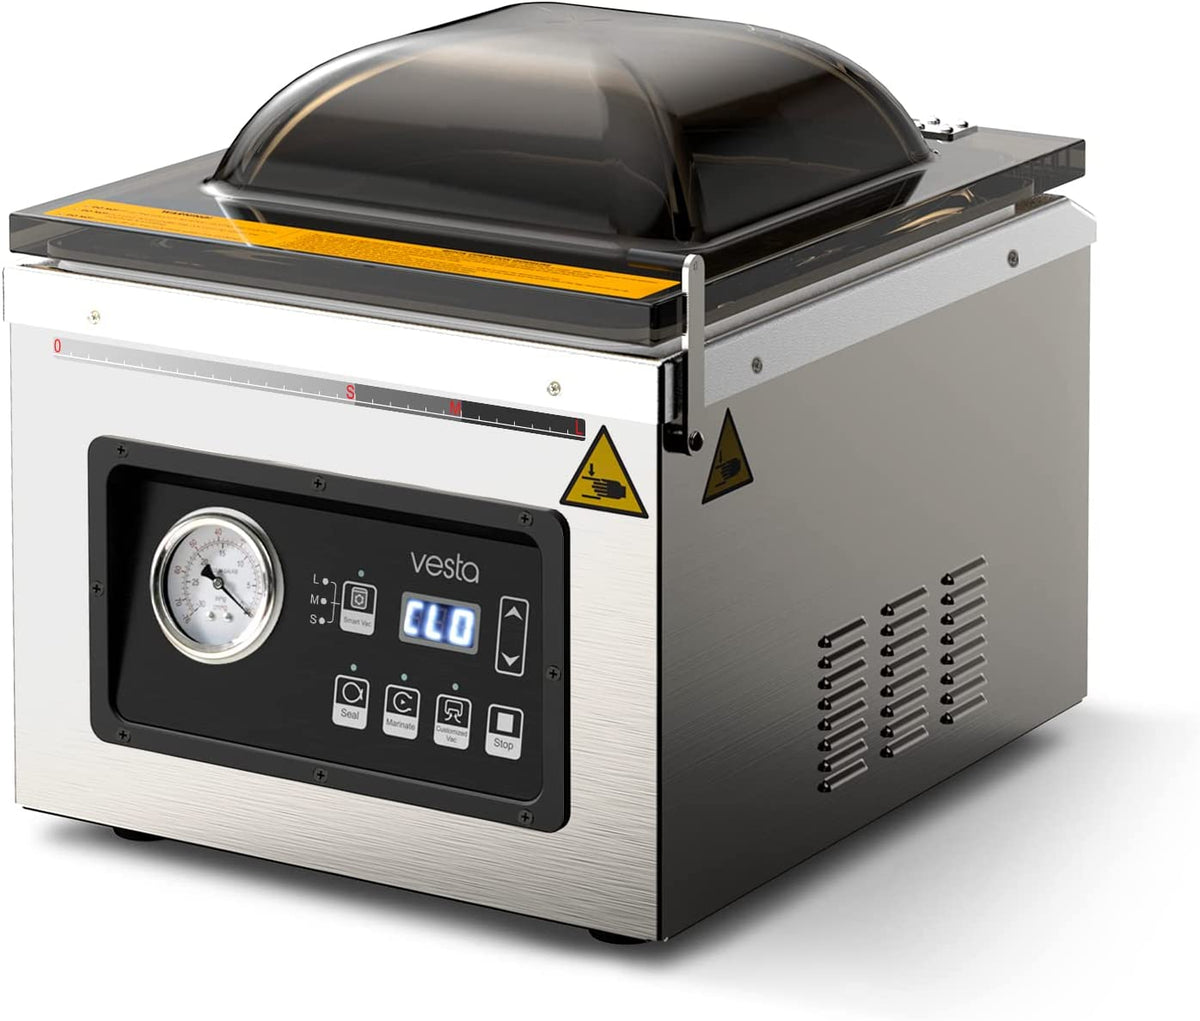 Chamber Vacuum Sealer with Smart Vac and Dry Pump – Vesta Precision